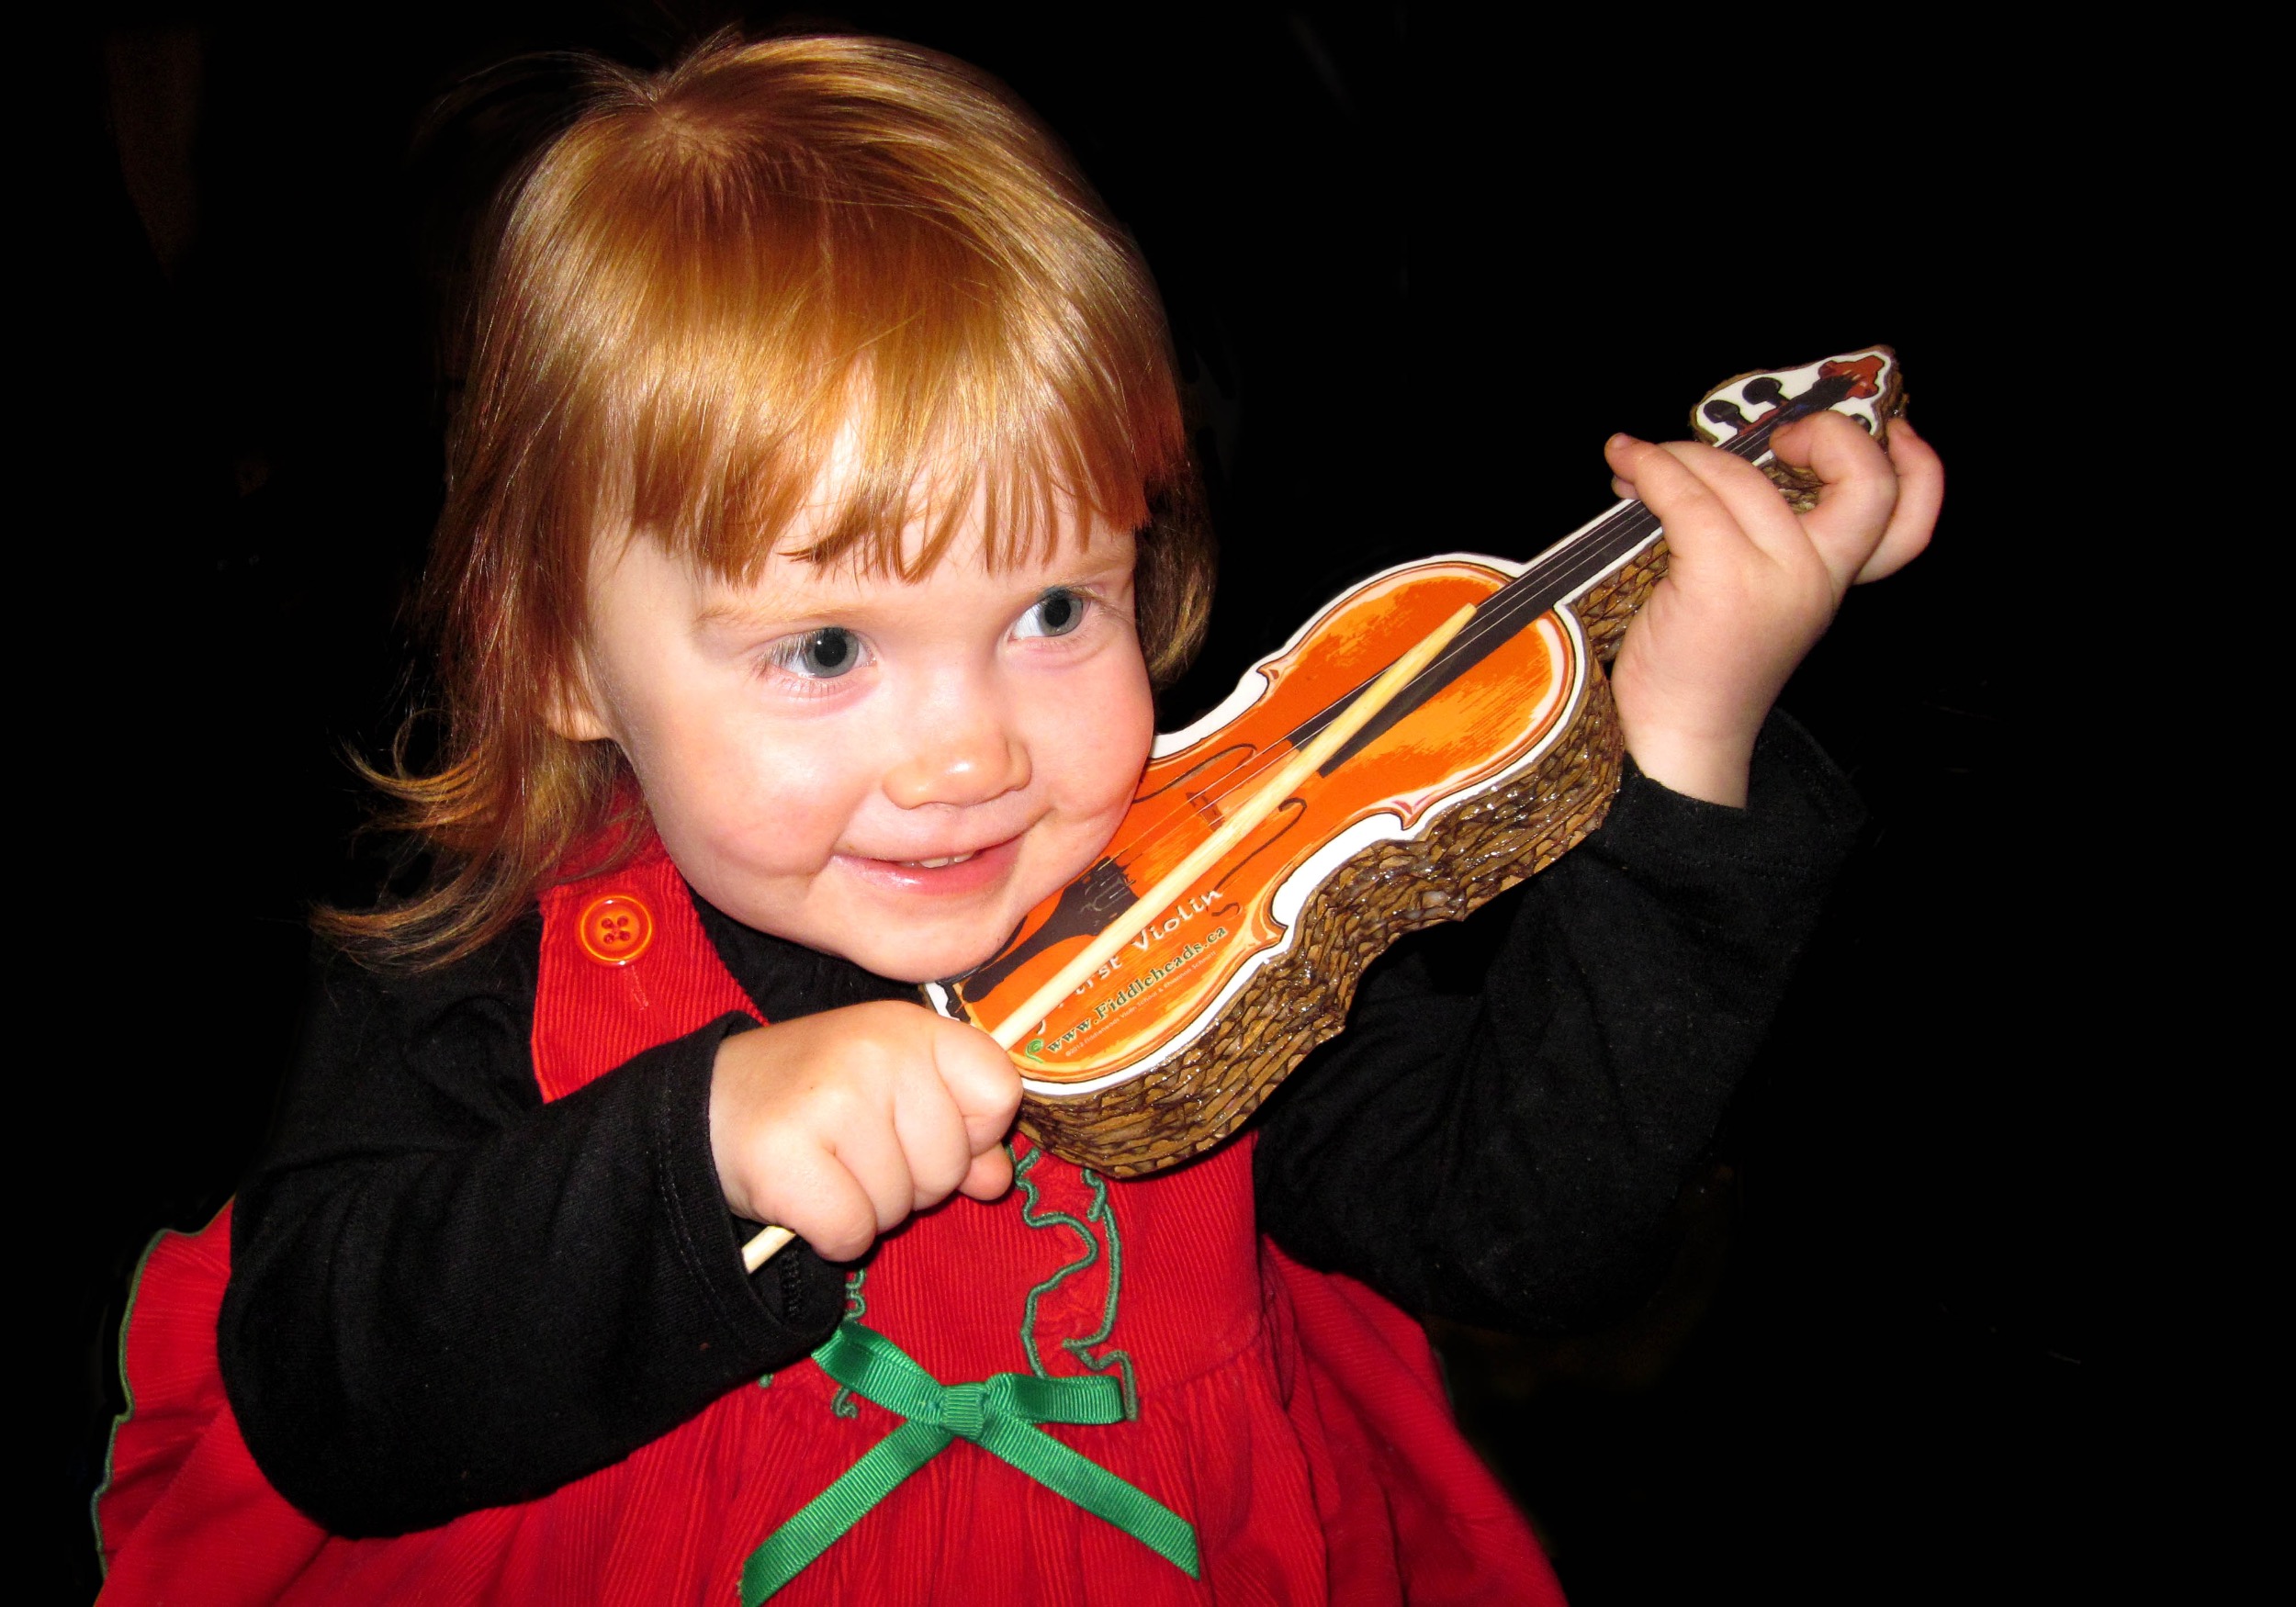 Red-headed toddler in a red dress smiling and playing a cardboard violin with a chopstick as a bow